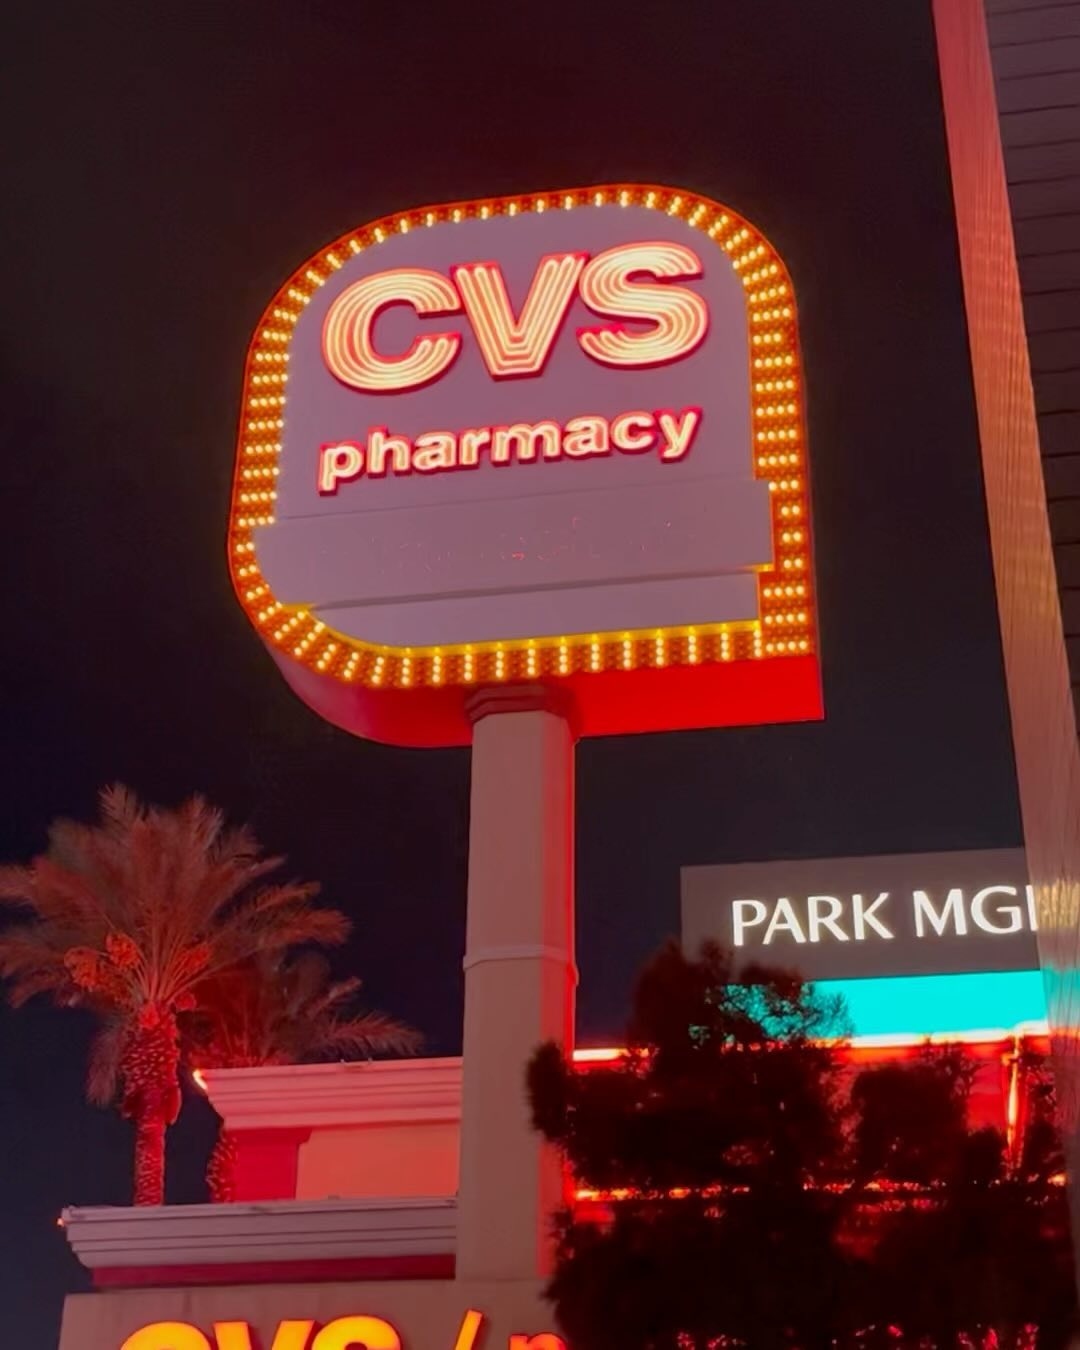 All the impressive and over the top Las Vegas signage! Even the “normal” stores get in on the action. #neonlights #lasvegasstrip #lasvegas#signs #notupstate